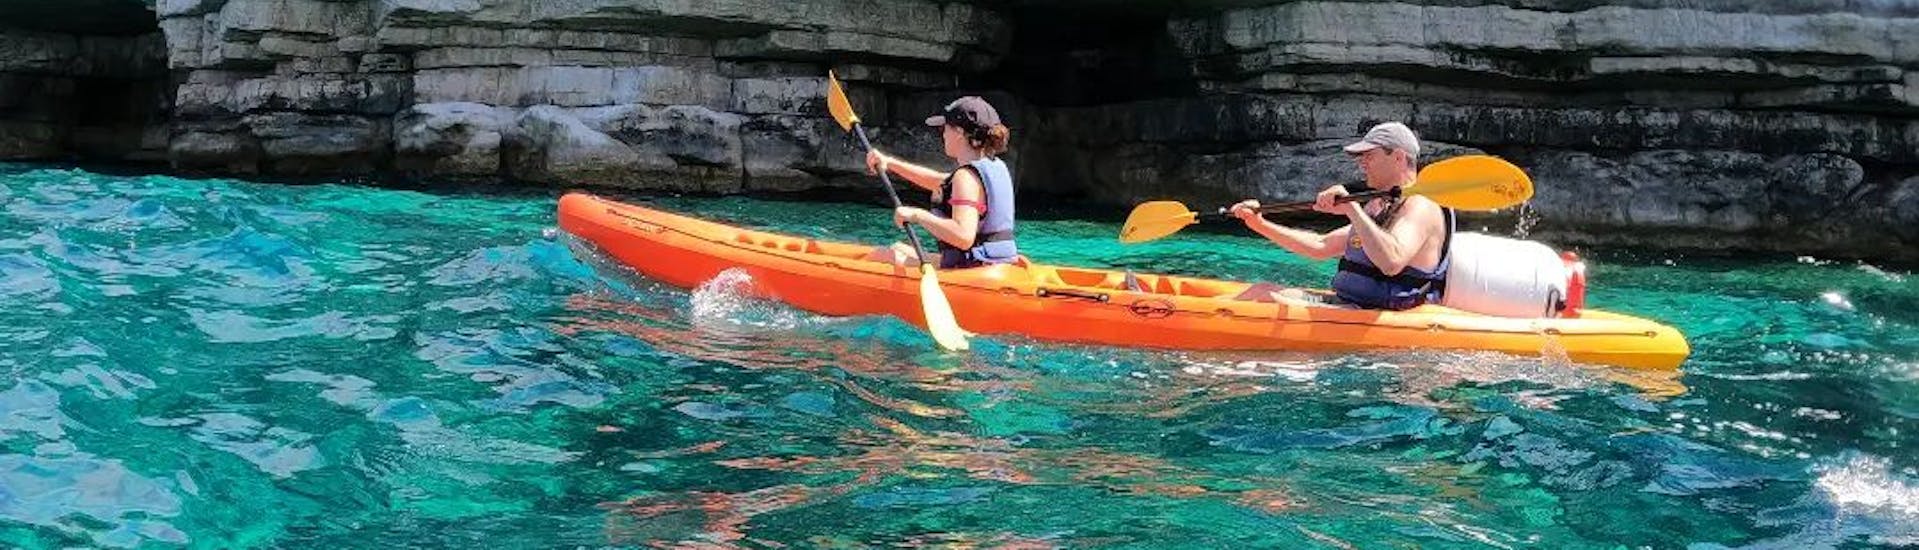 Sea Kayak in the blue waters of the Adriatic sea in front of a cave during Sea Kayak Tour to the Caves of Pula by Pula Adventure Team.